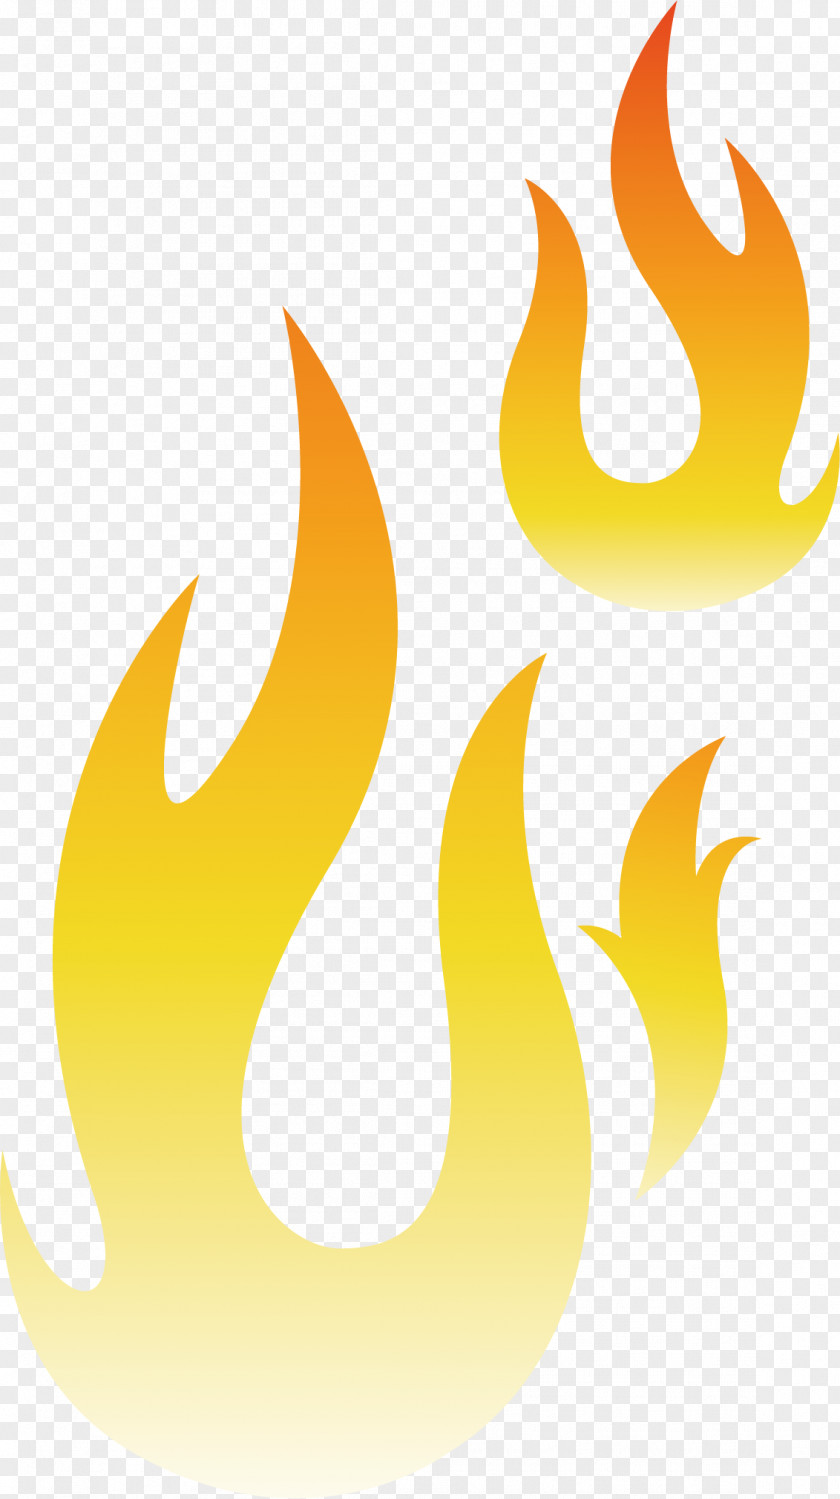 Various Shapes Of Flames Flame Shape Clip Art PNG